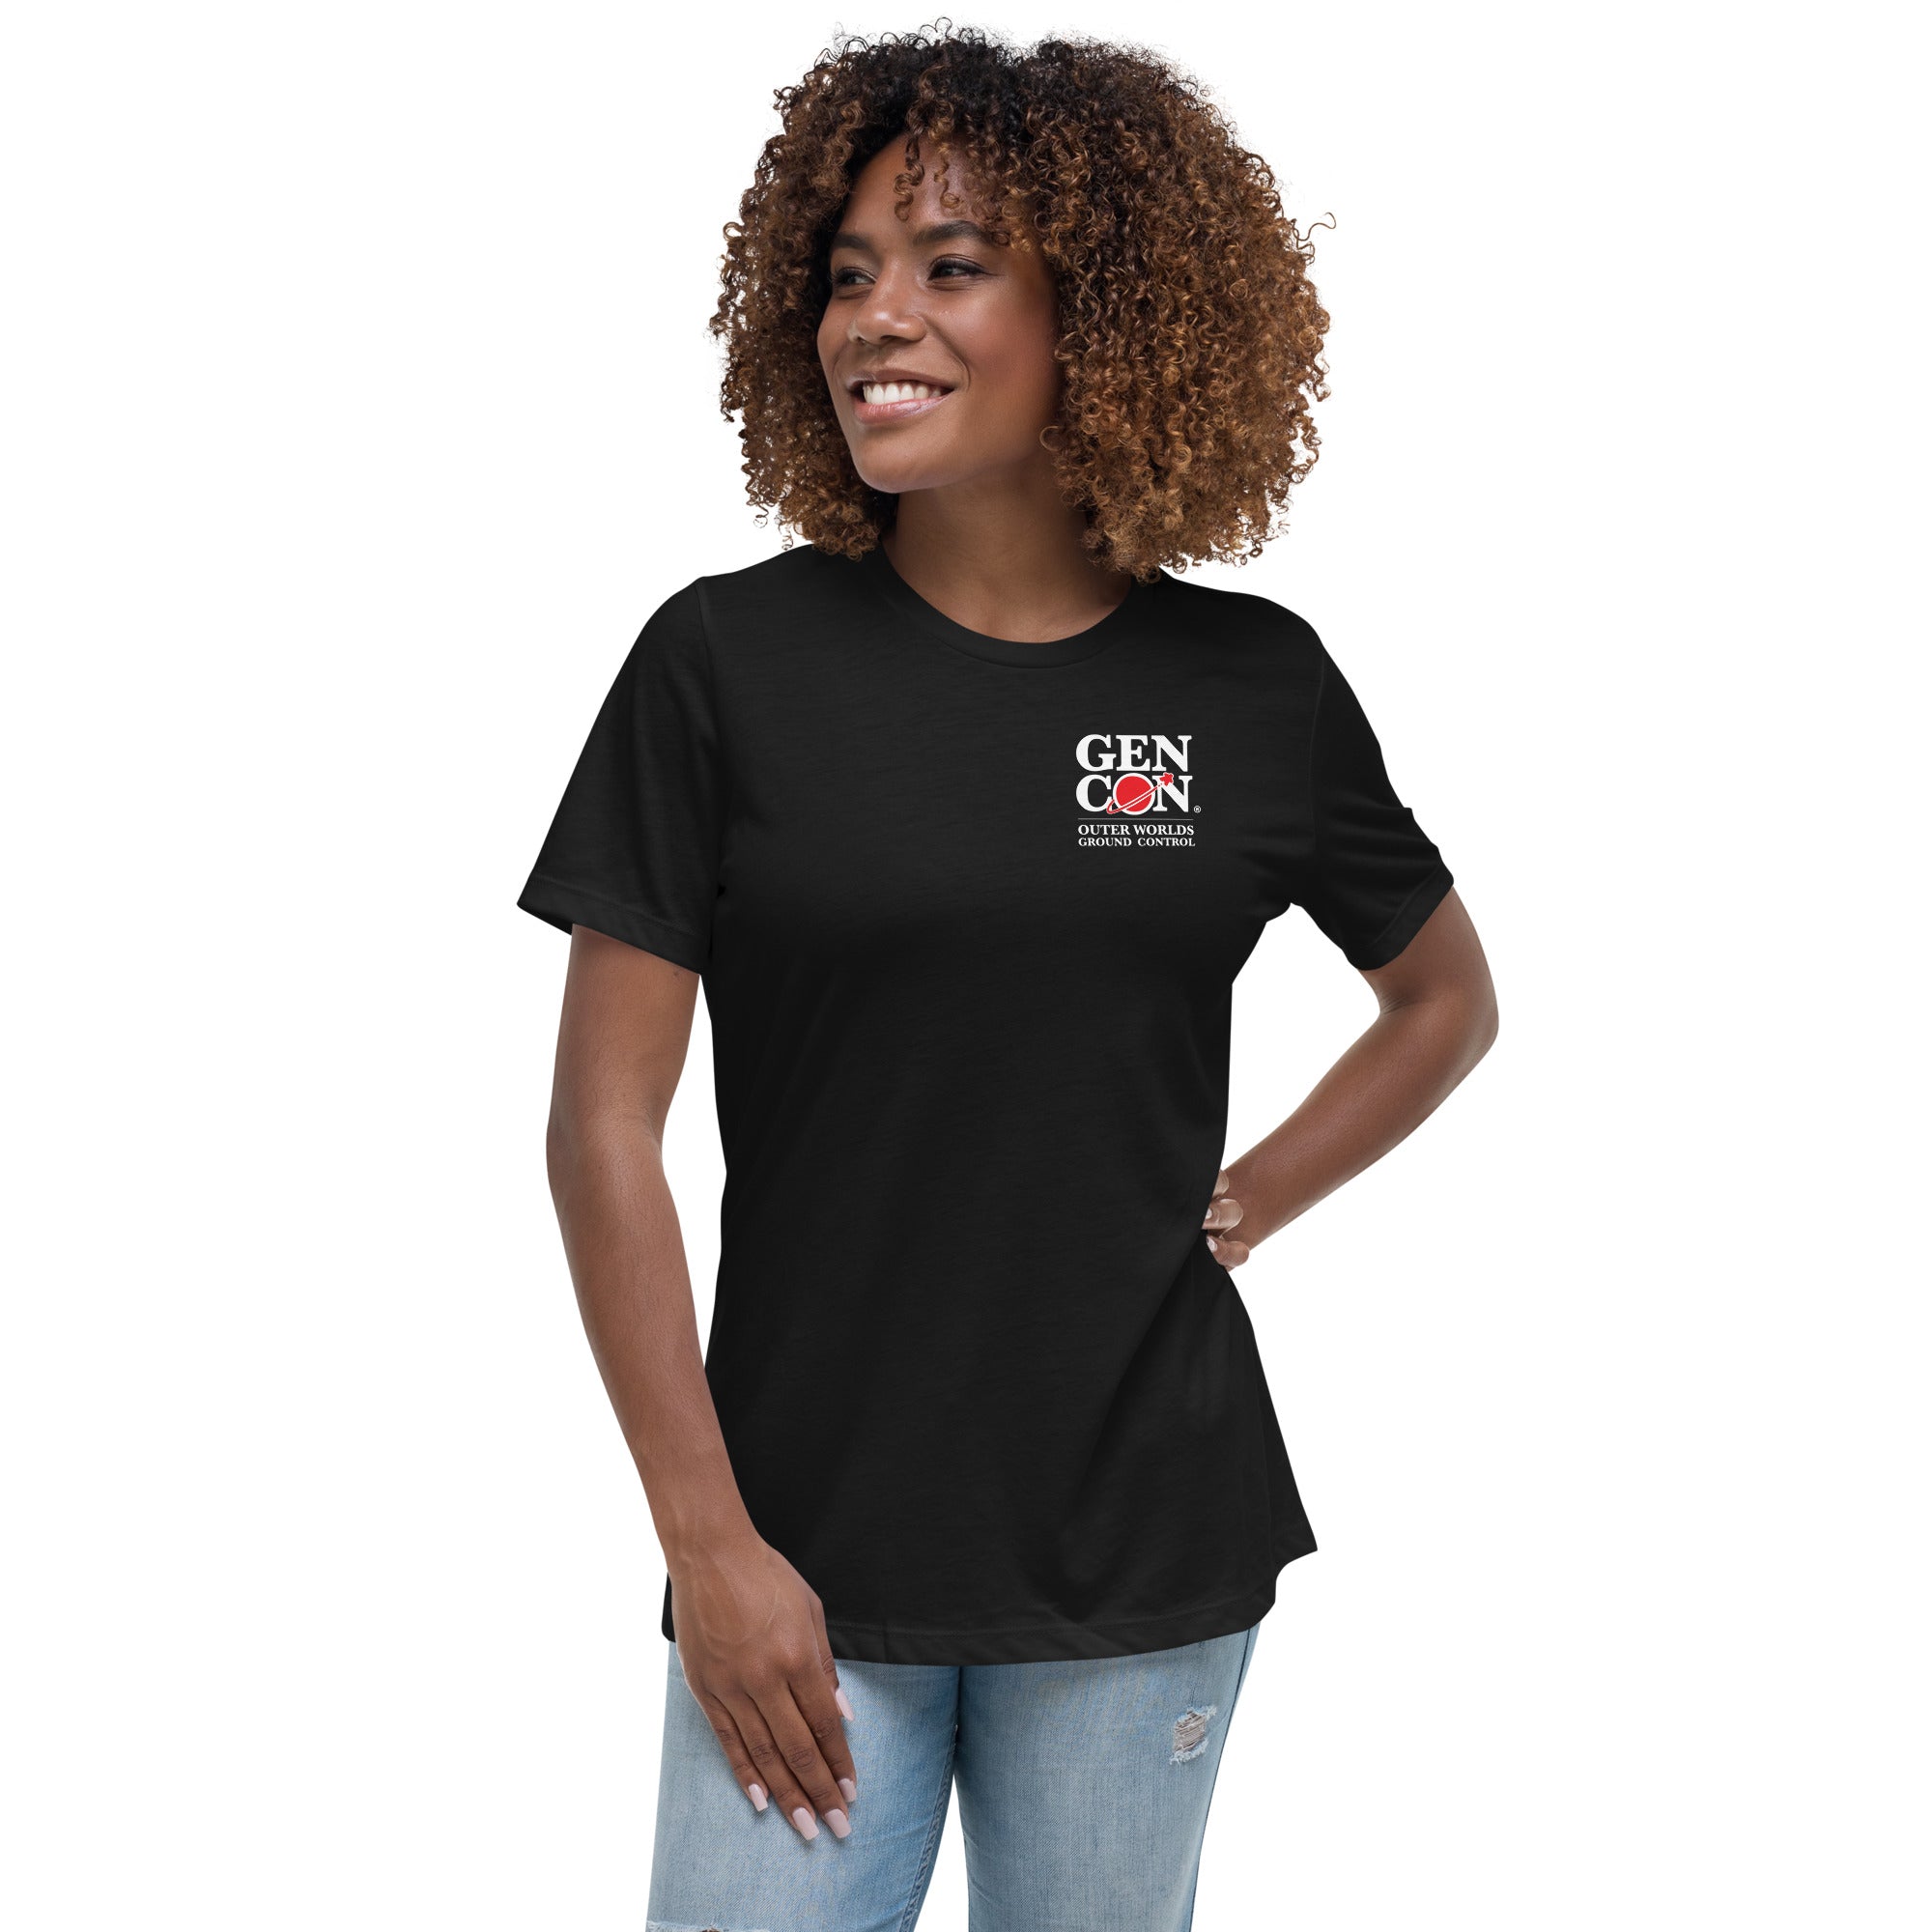 Gen Con Outer Worlds Ground Control Femme T-Shirt | Rollacrit